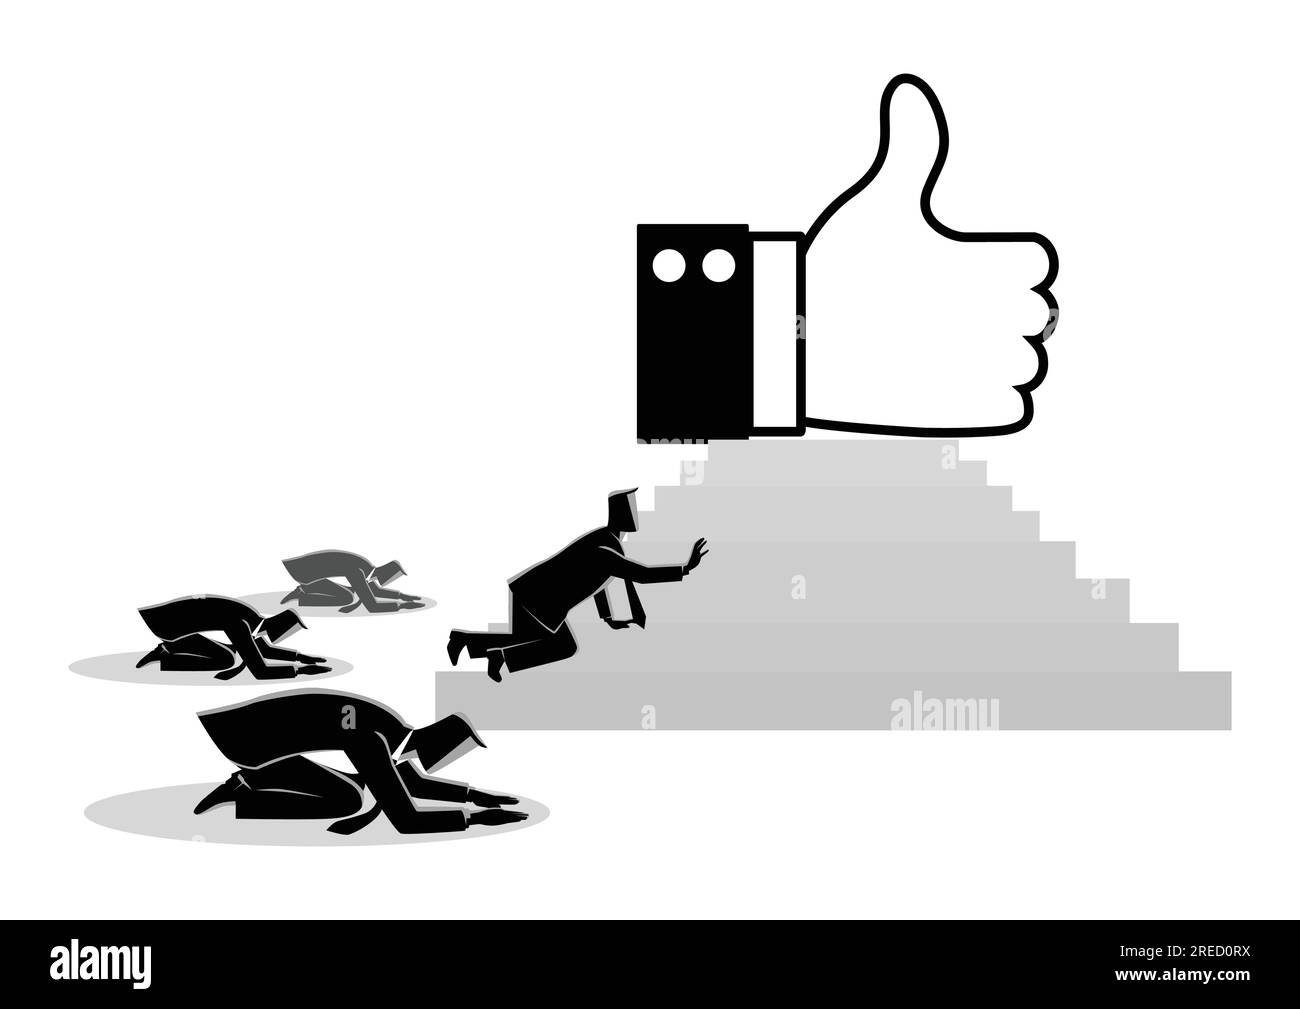 Concept vector illustration of people worshiping thumb up icon. Social media concept, people obsessed with 'like' icon, getting more Likes is a critic Stock Vector